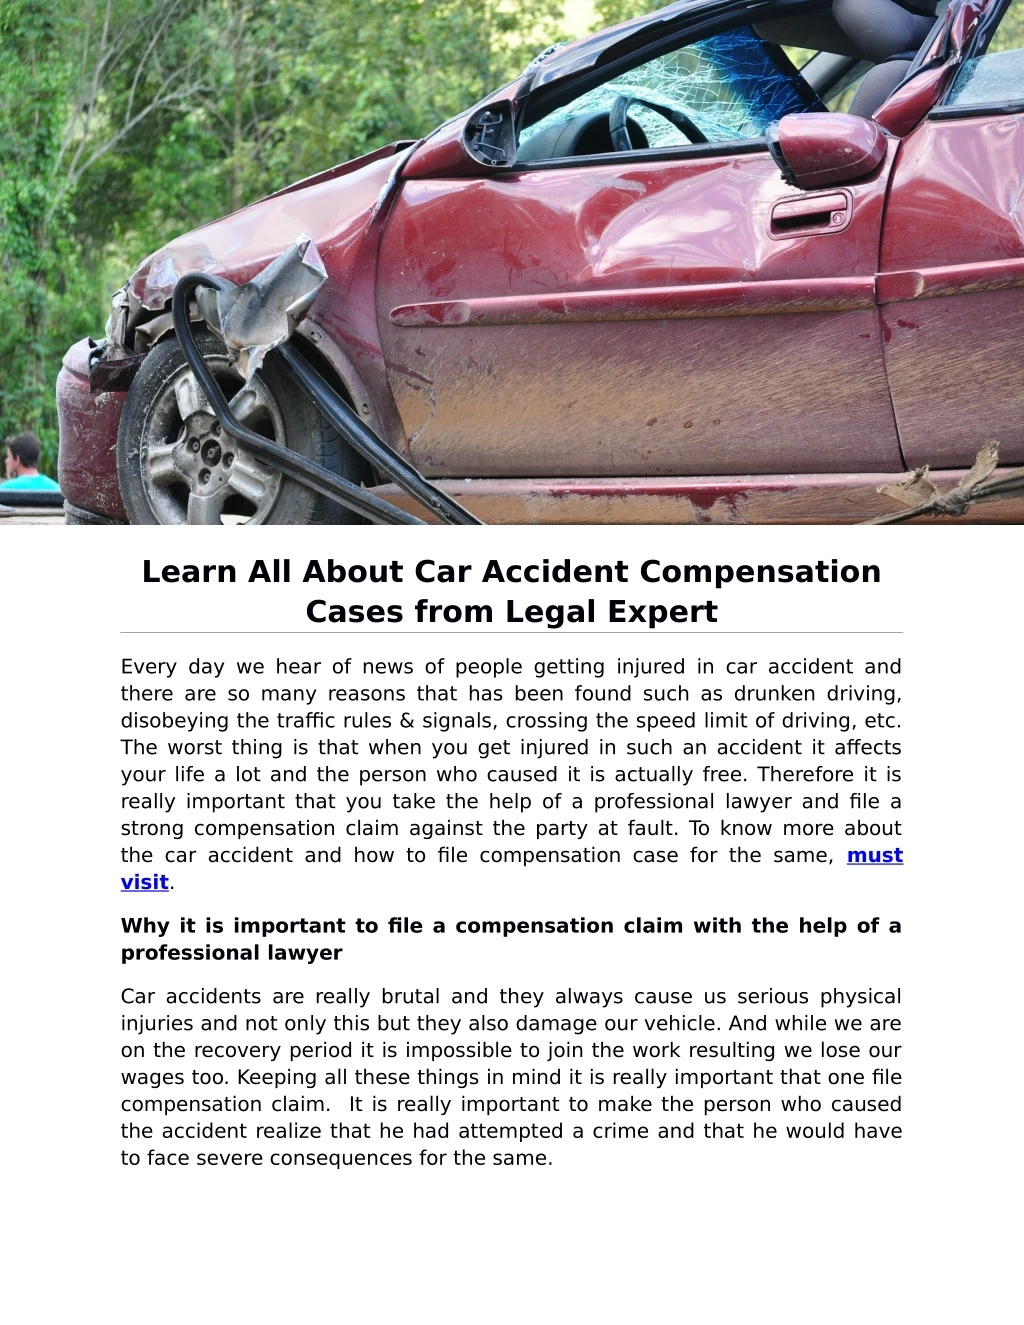 learn all about car accident compensation cases